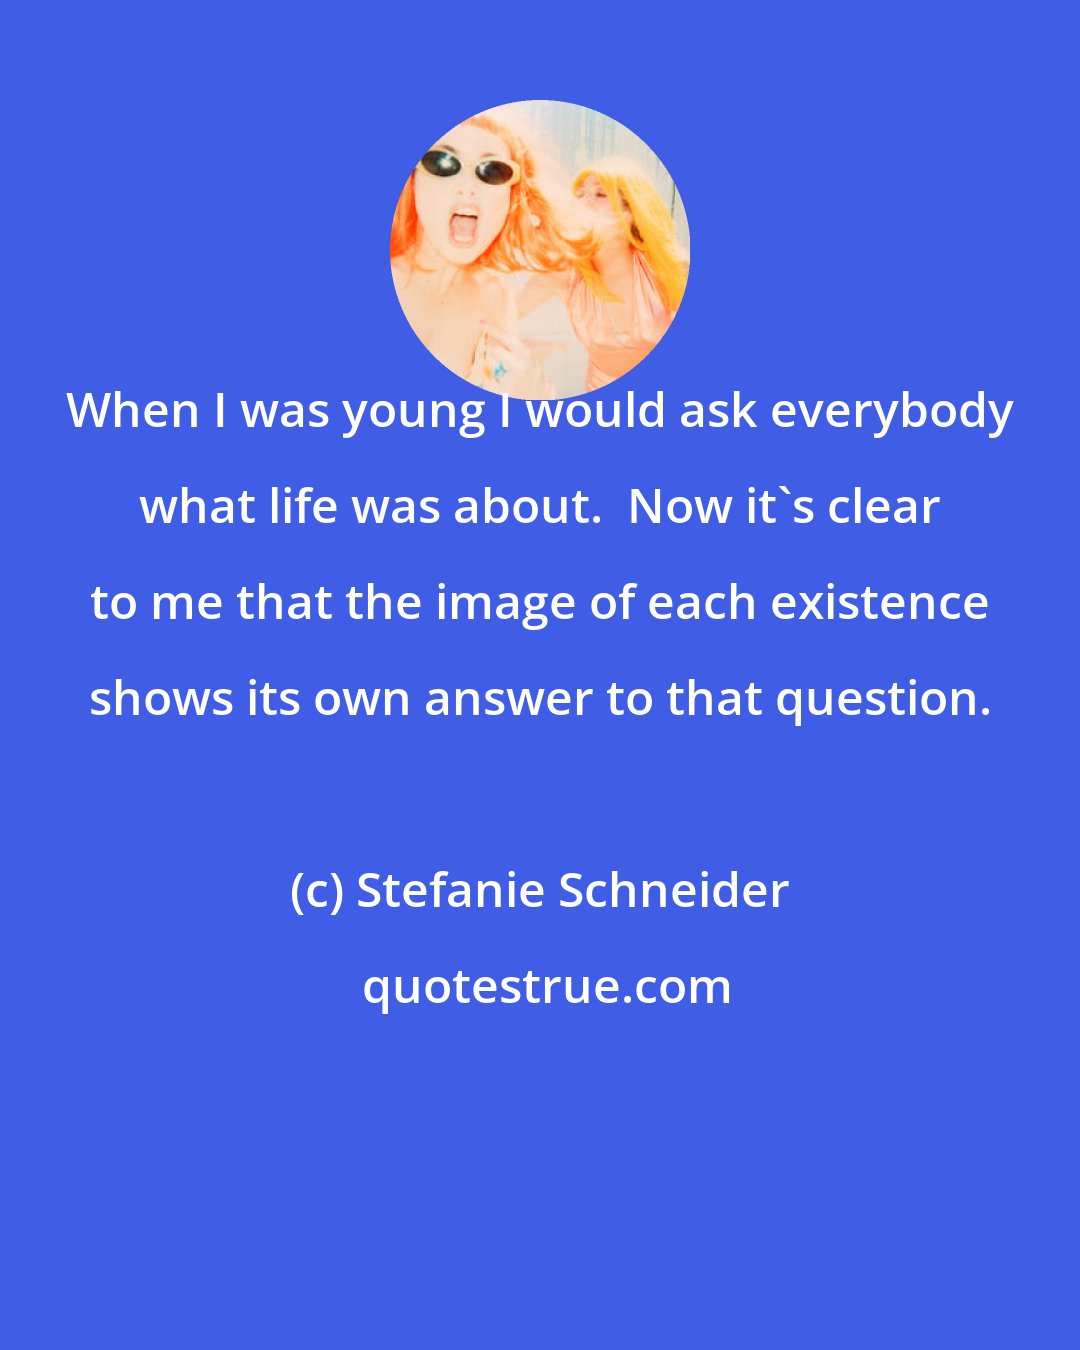 Stefanie Schneider: When I was young I would ask everybody what life was about.  Now it's clear to me that the image of each existence shows its own answer to that question.